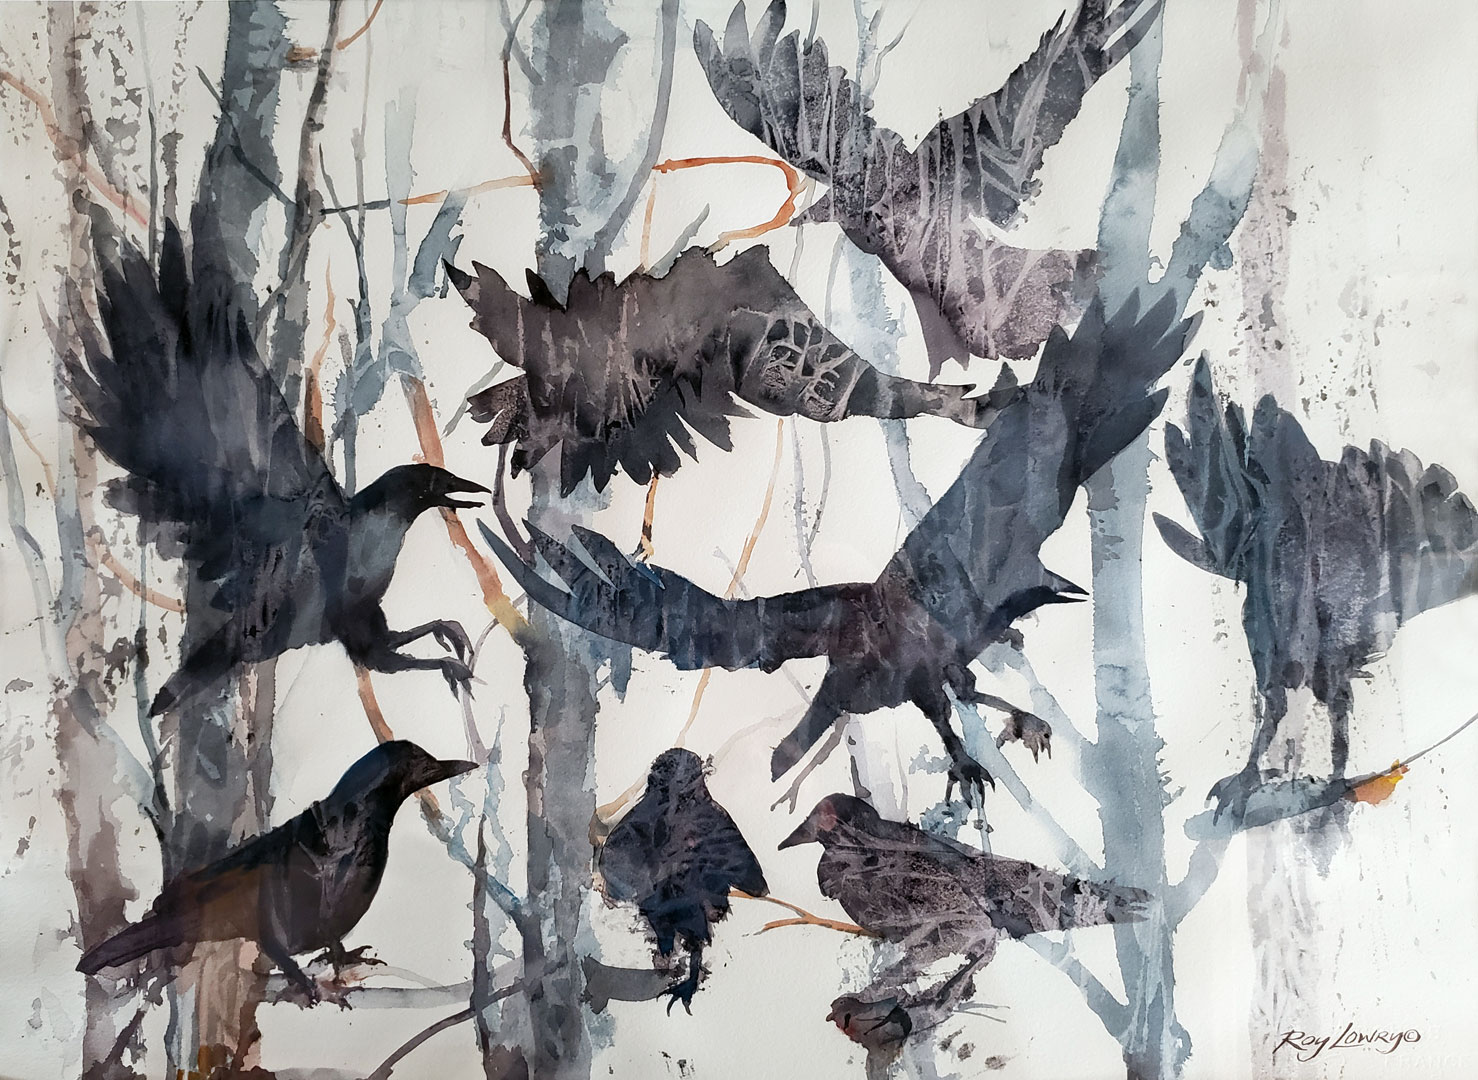 Crows in the Trees, Watercolor on paper, 30 x 22